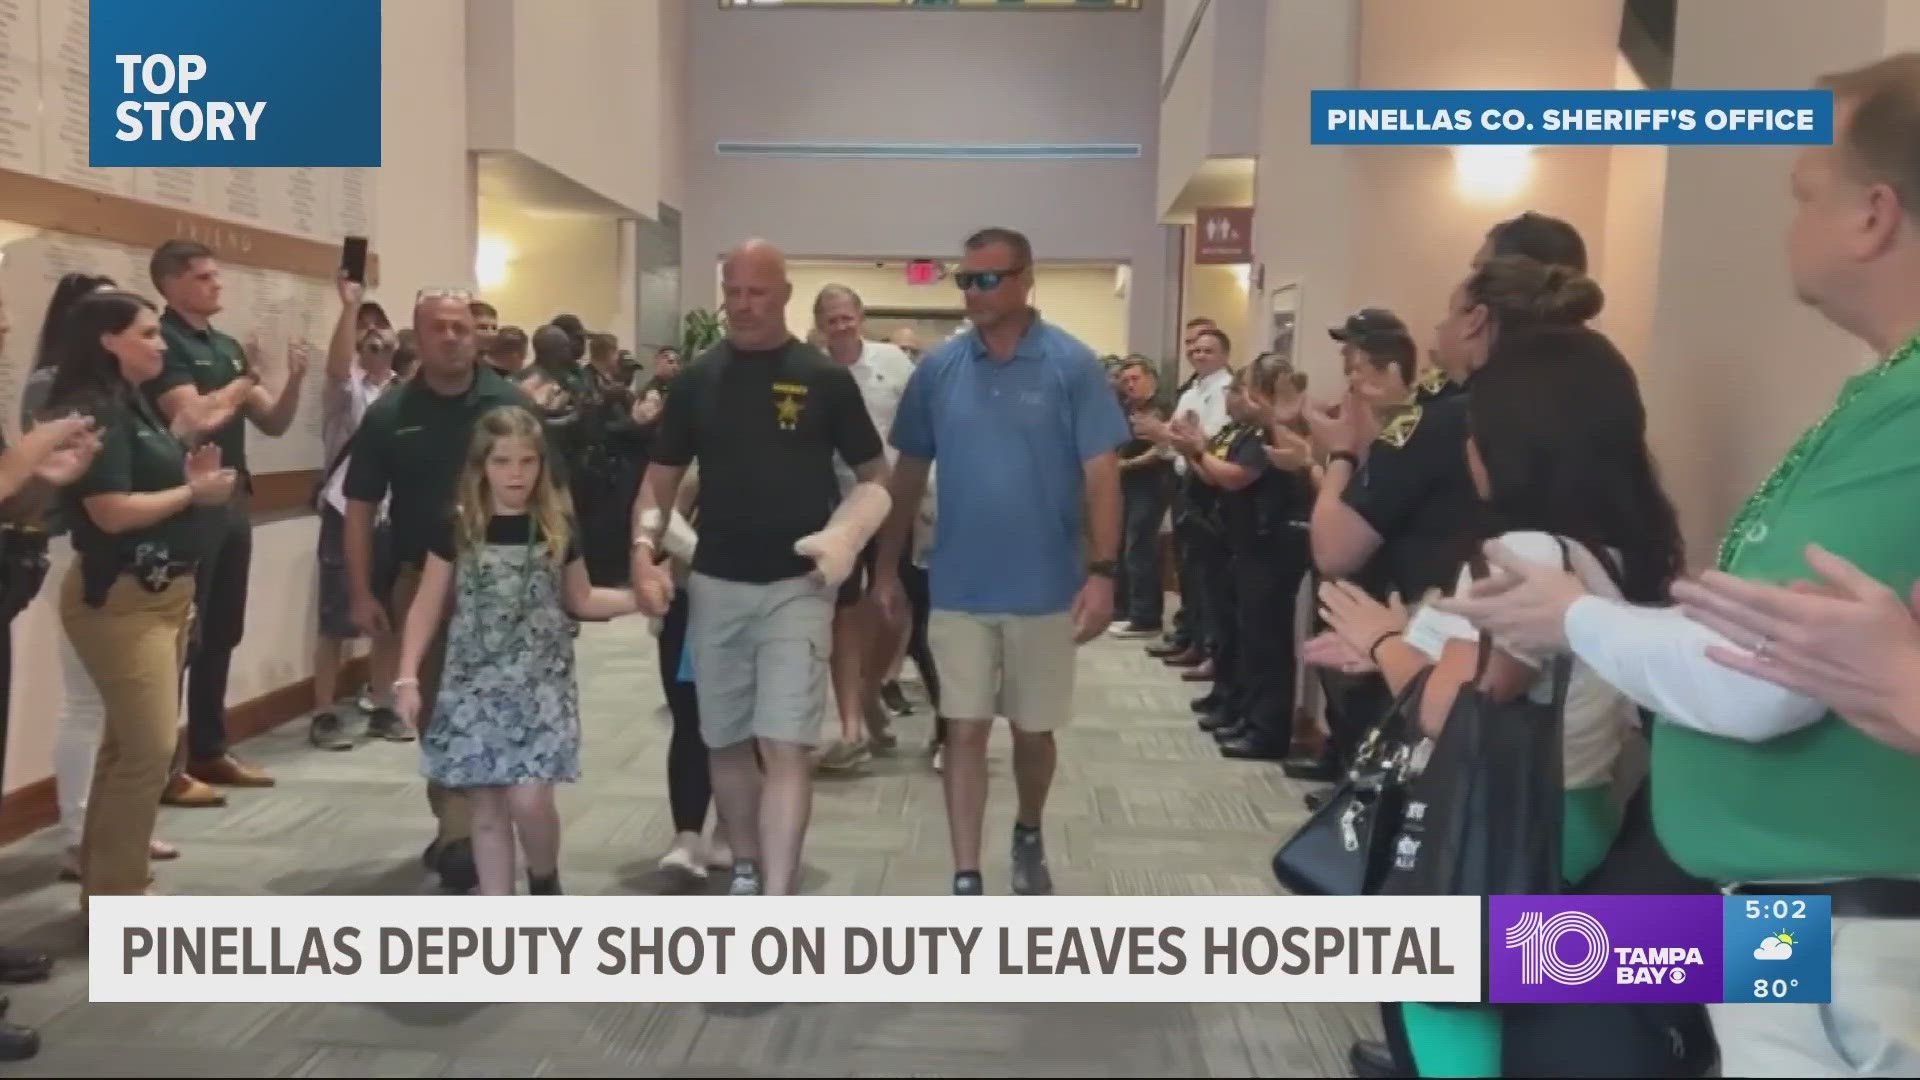 Corporal Matt Aitken was at Bayfront Health St. Petersburg receiving treatment for gunshot wounds to his leg, arm and neck from a shooting on Sunday.